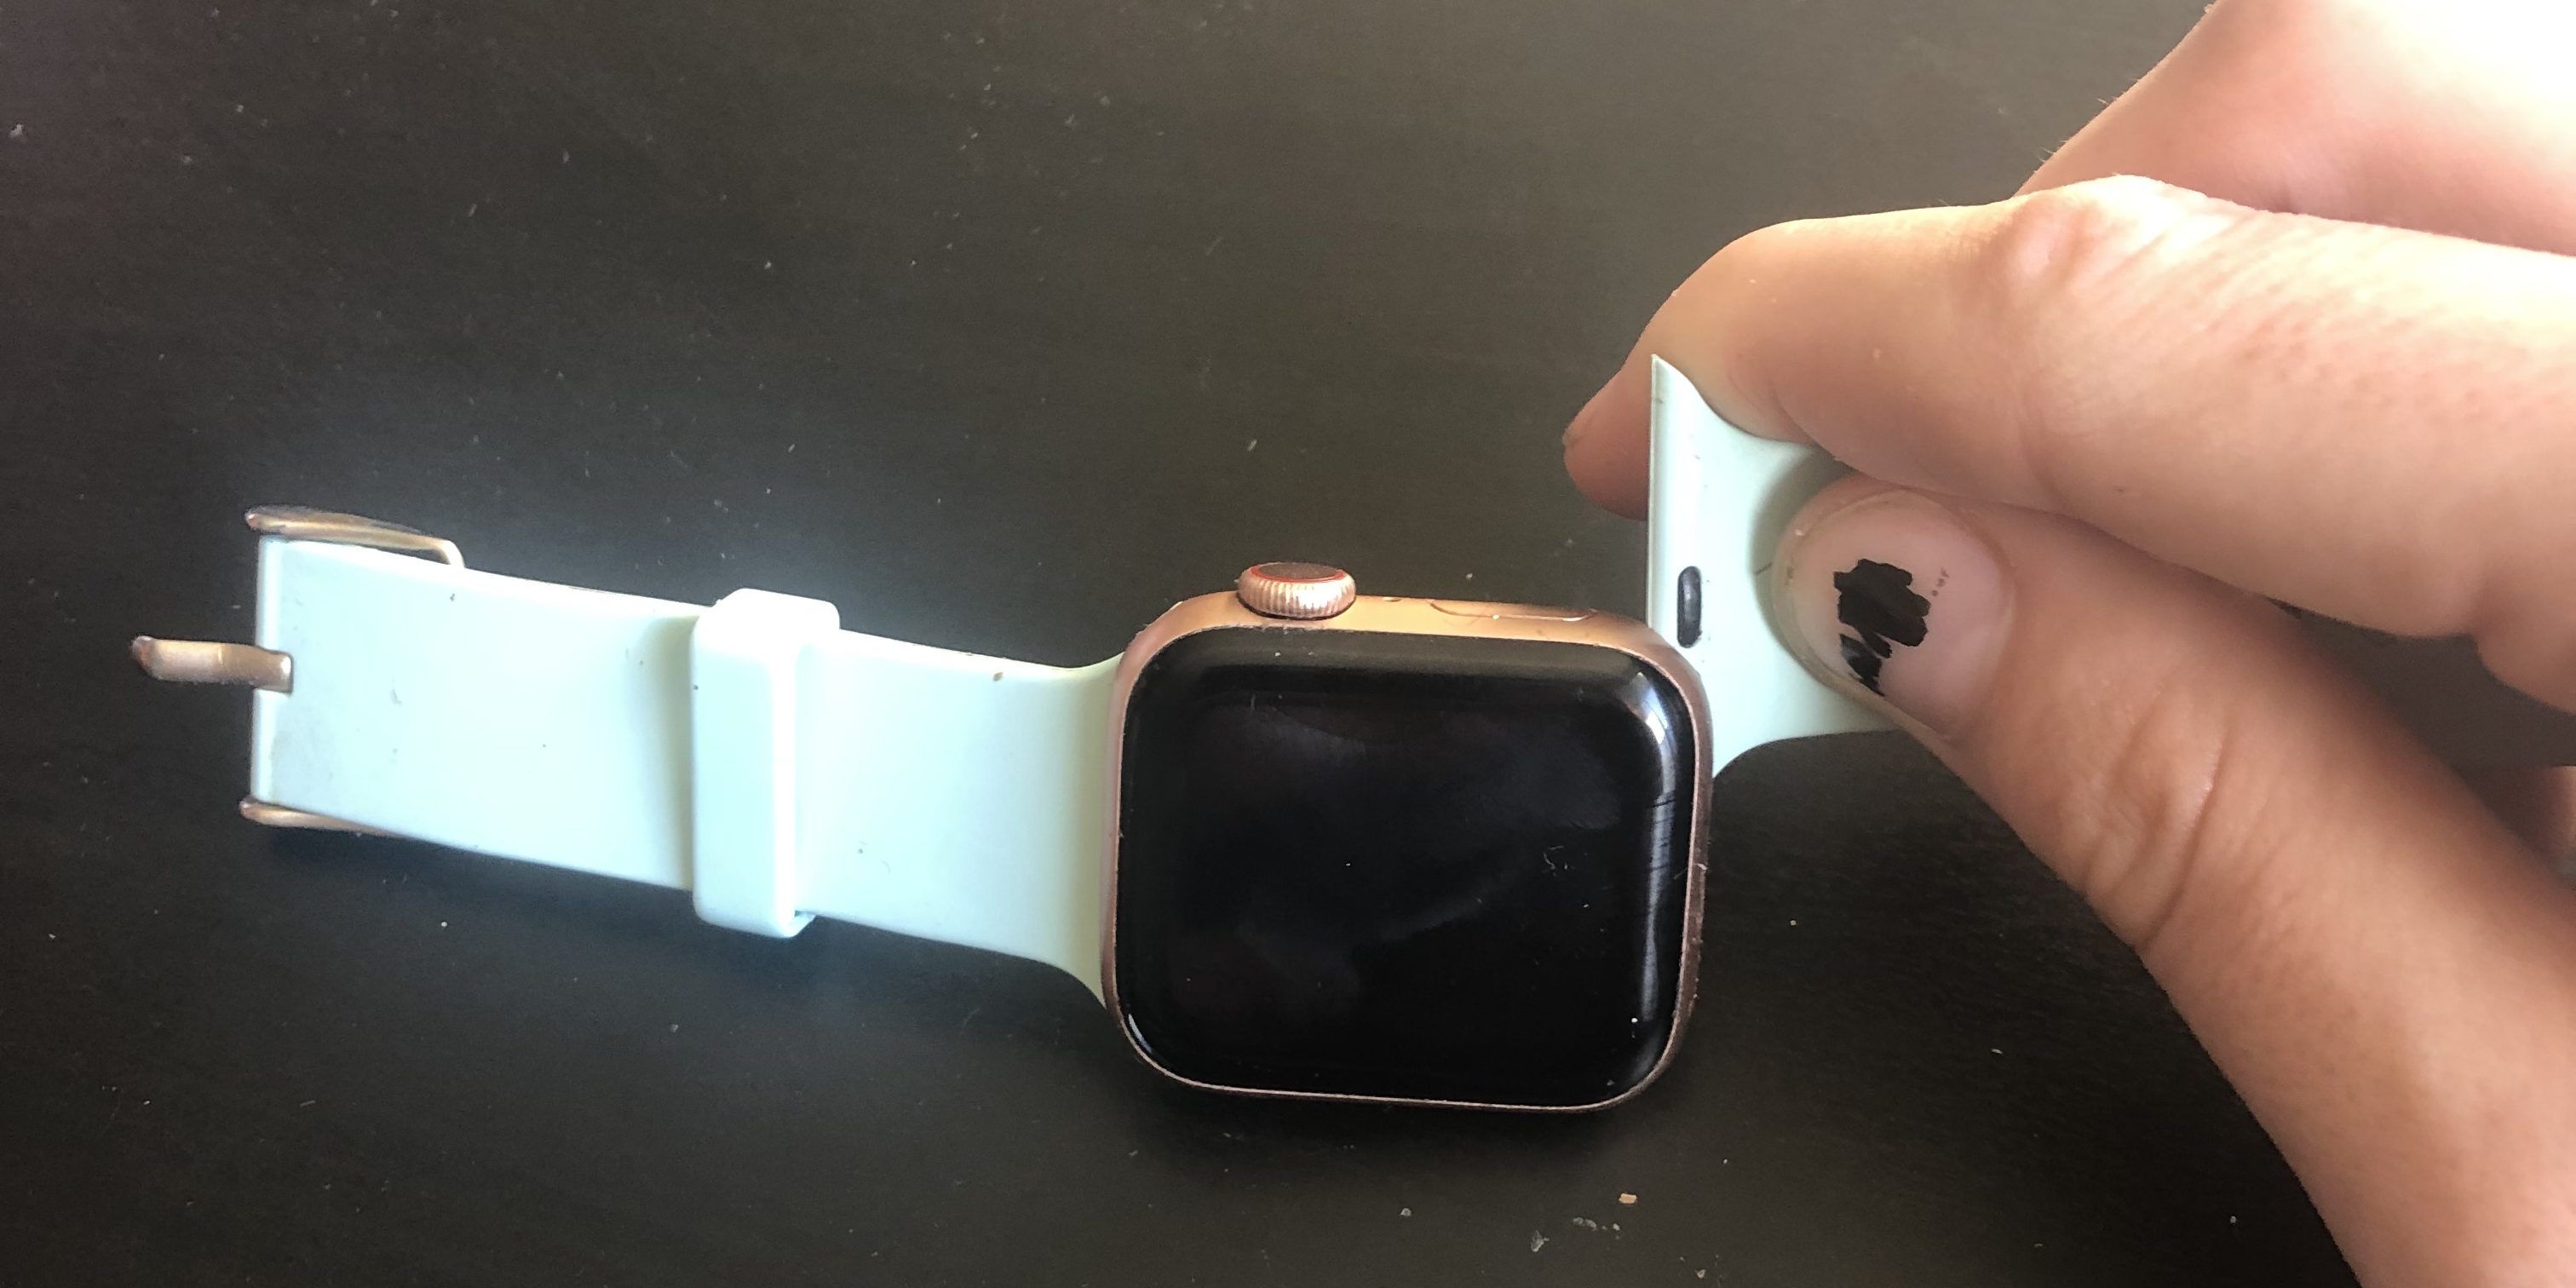 apple watch band being attached e1614094225586 - Come indossare un cinturino per Apple Watch